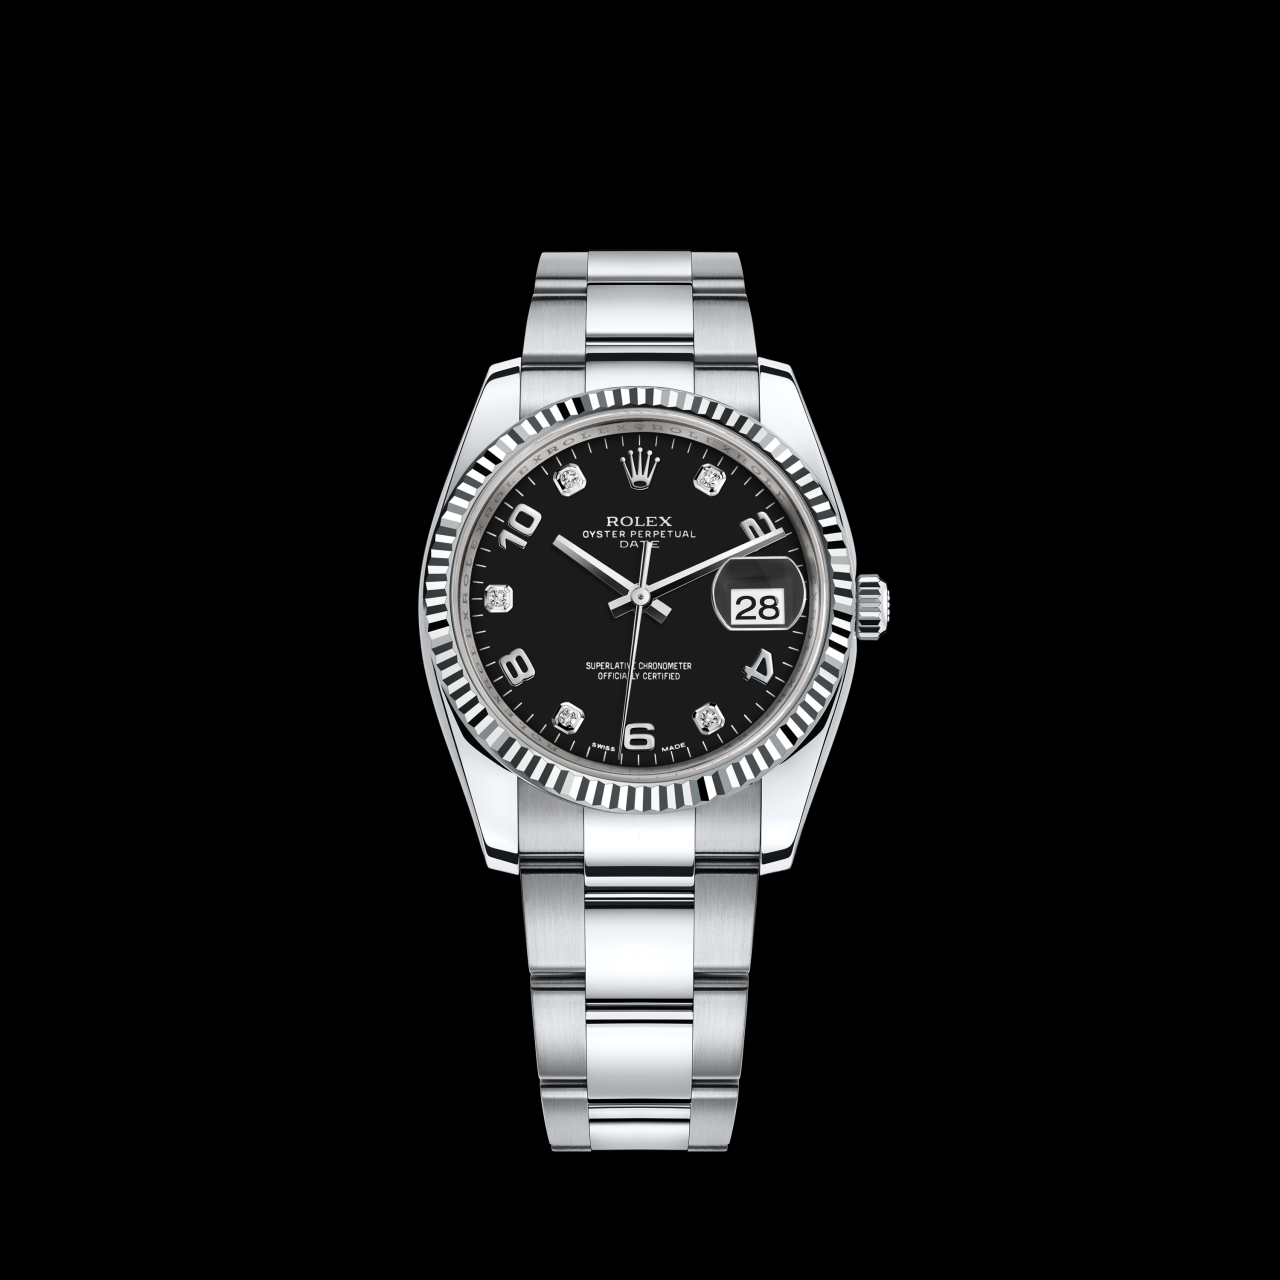 Cheap Replica Breitling Watches 